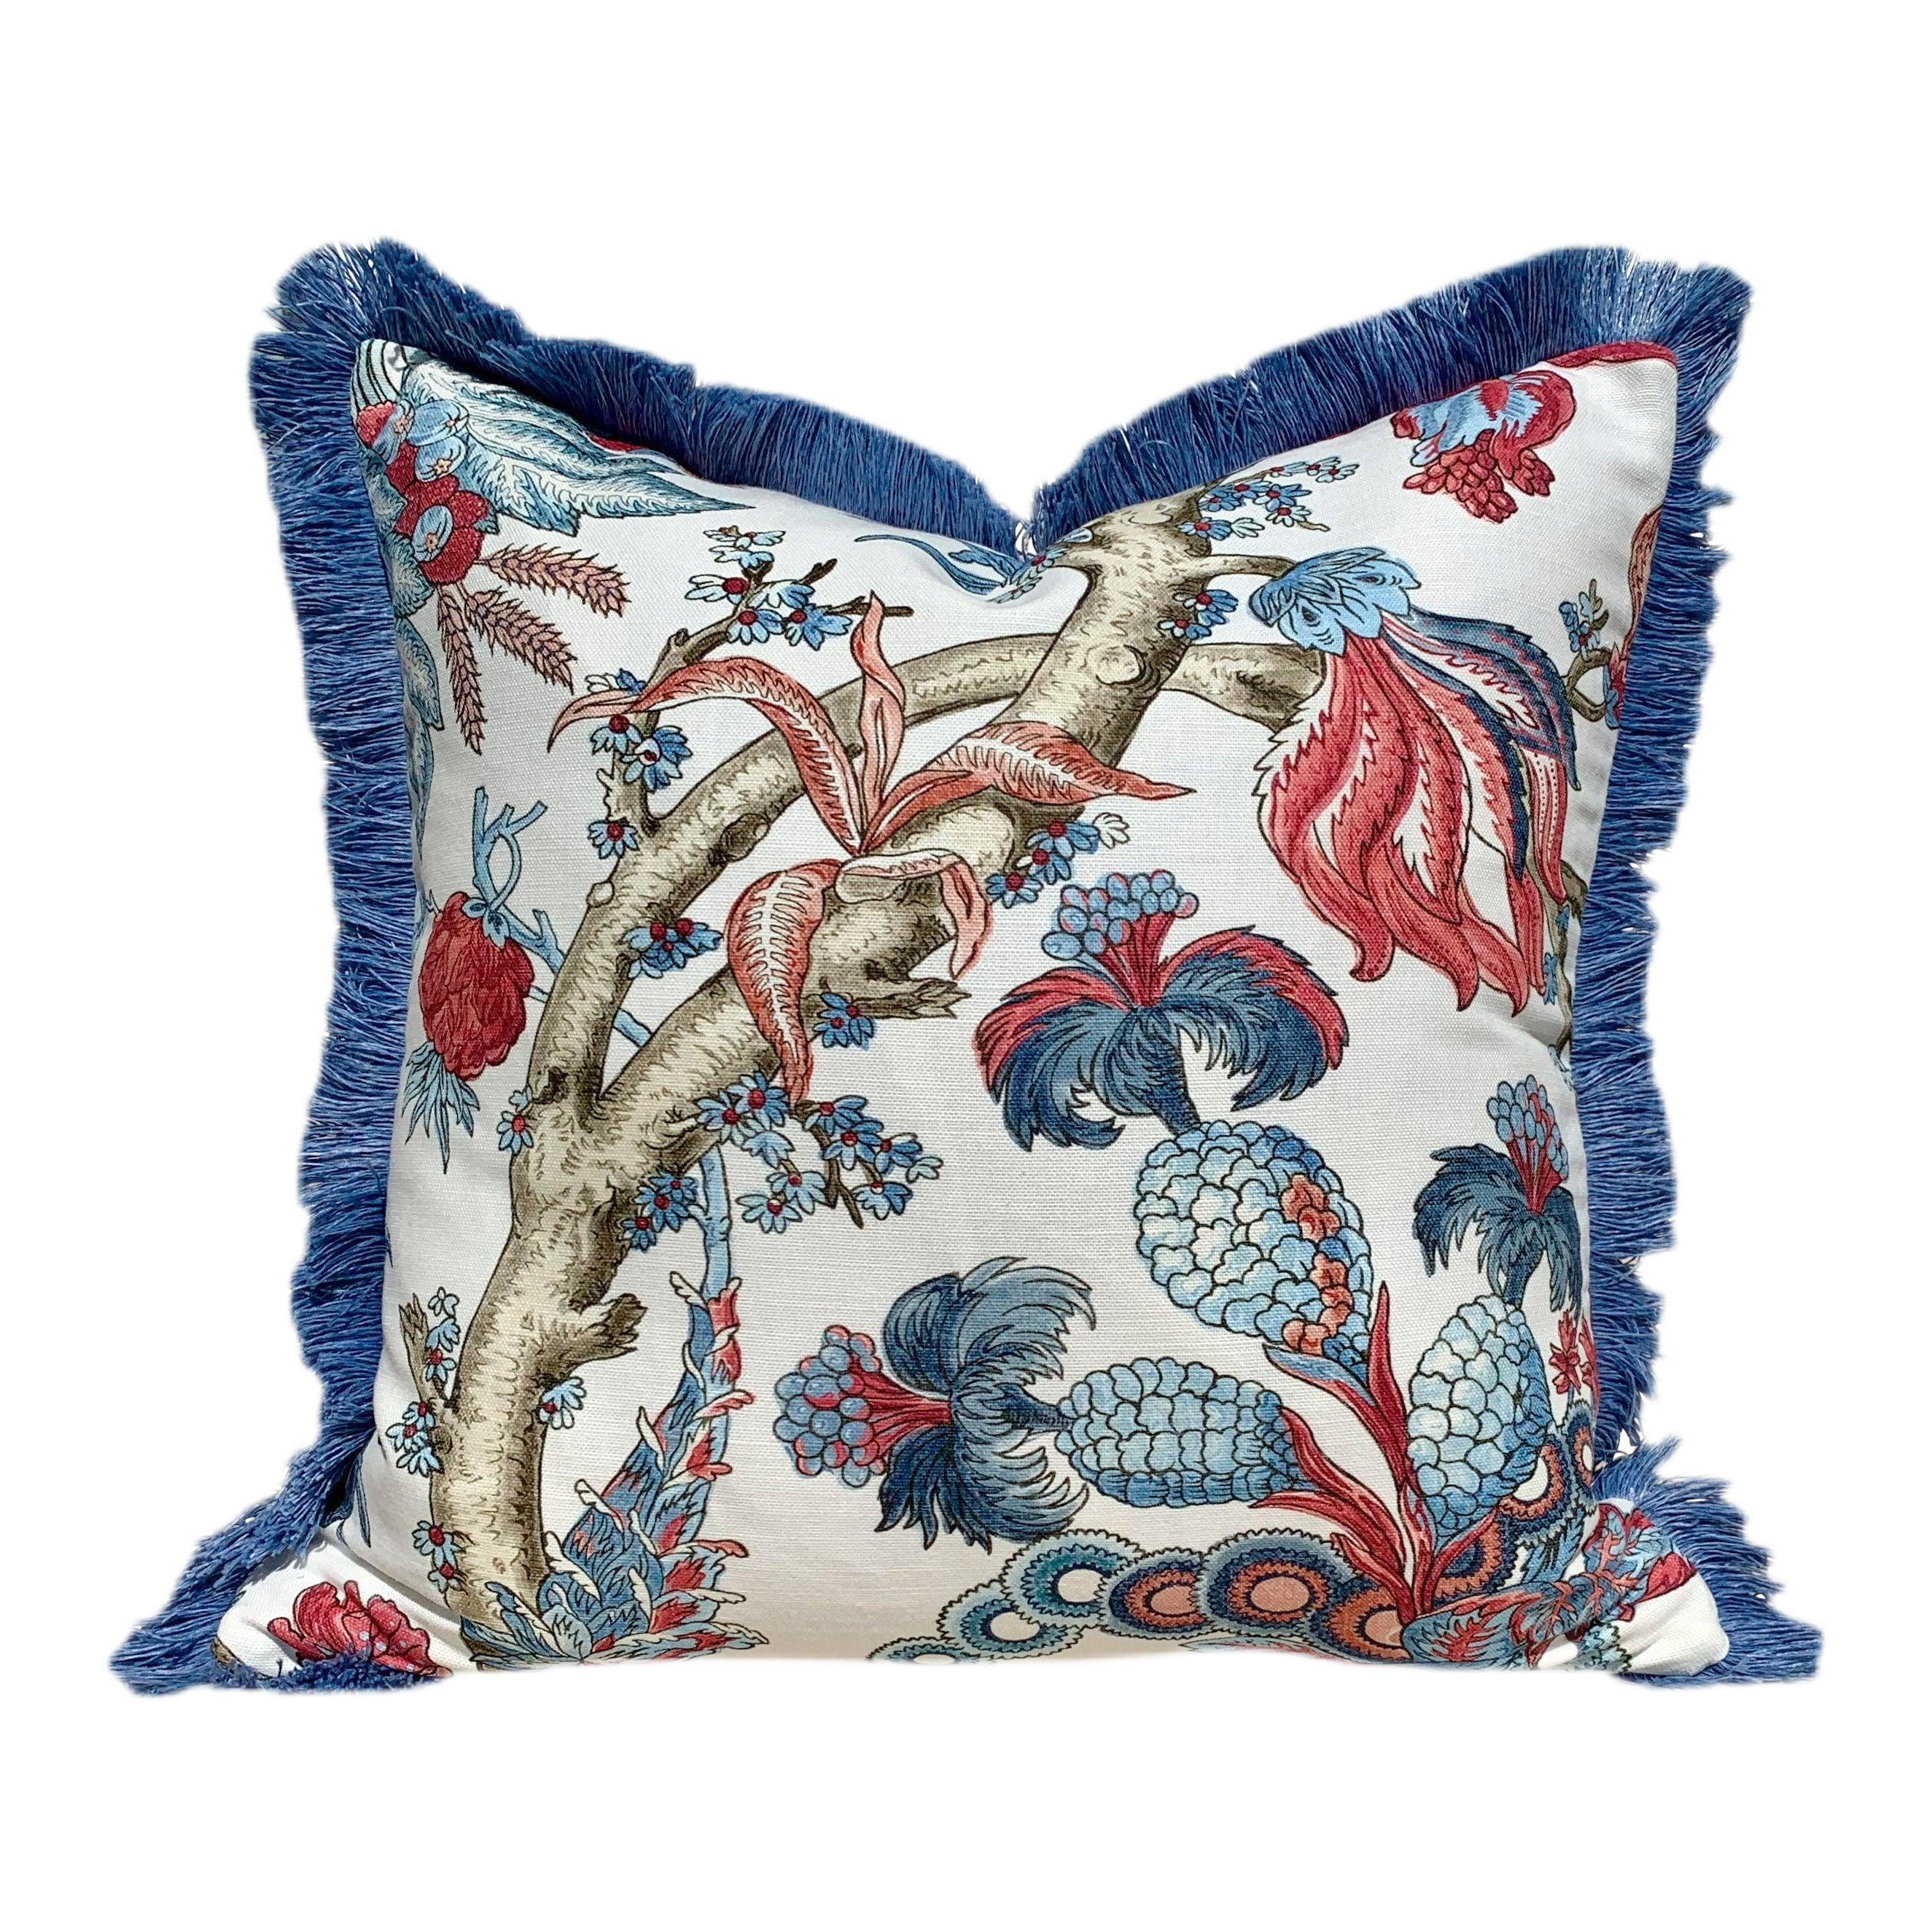 Chatelain Pillow Cover in Blue and Red.